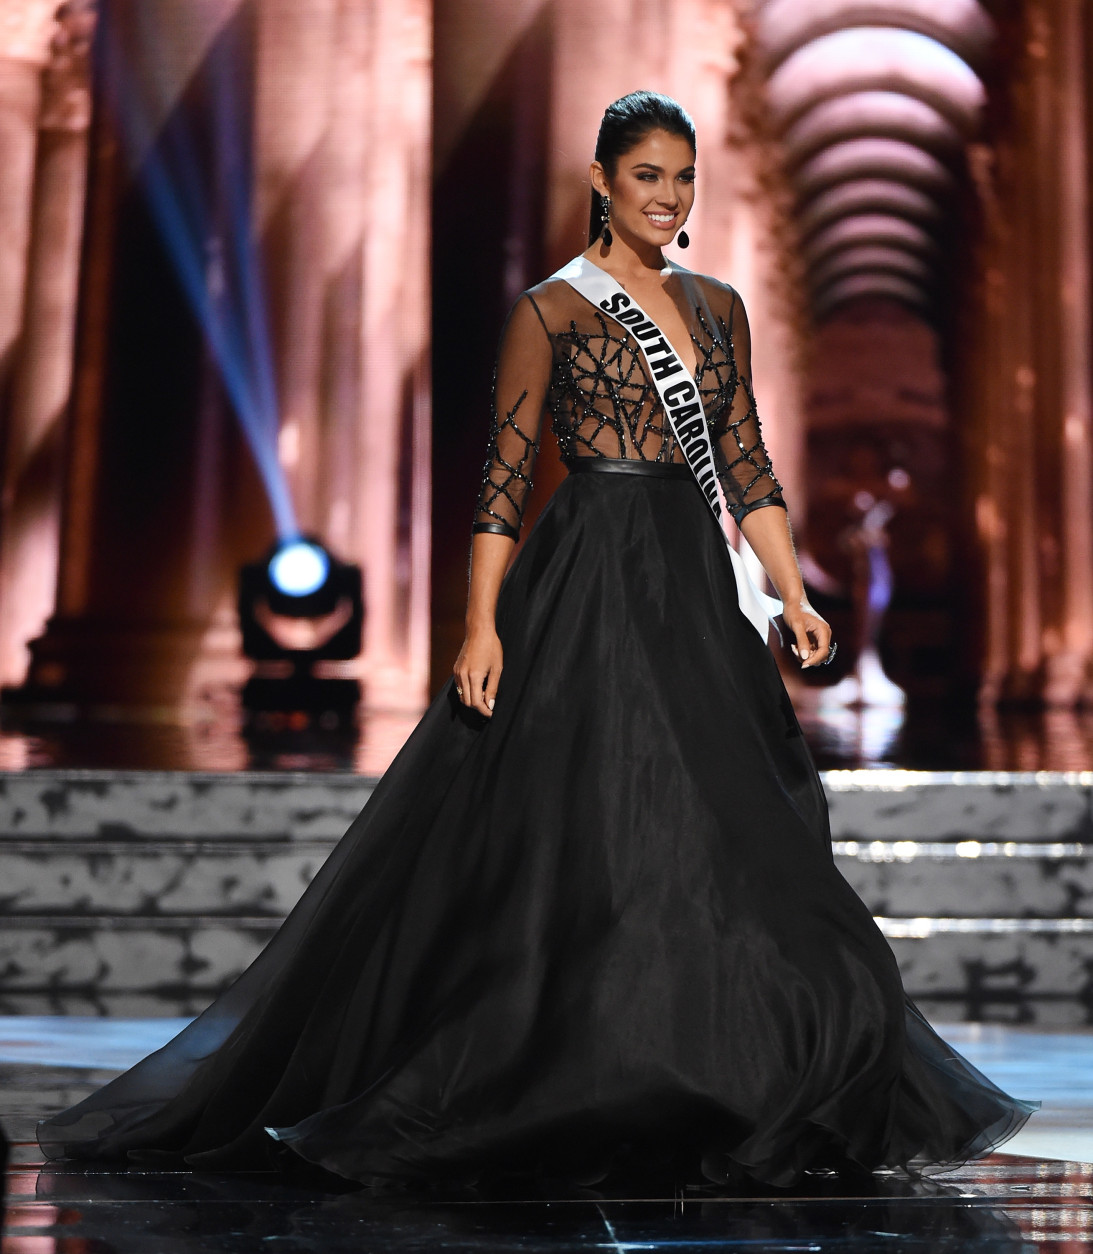 LAS VEGAS, NV - JUNE 01:  Miss South Carolina USA Leah Lawson competes in the evening gown competition during the 2016 Miss USA pageant preliminary competition at T-Mobile Arena on June 1, 2016 in Las Vegas, Nevada. The 2016 Miss USA will be crowned on June 5 in Las Vegas.  (Photo by Ethan Miller/Getty Images)